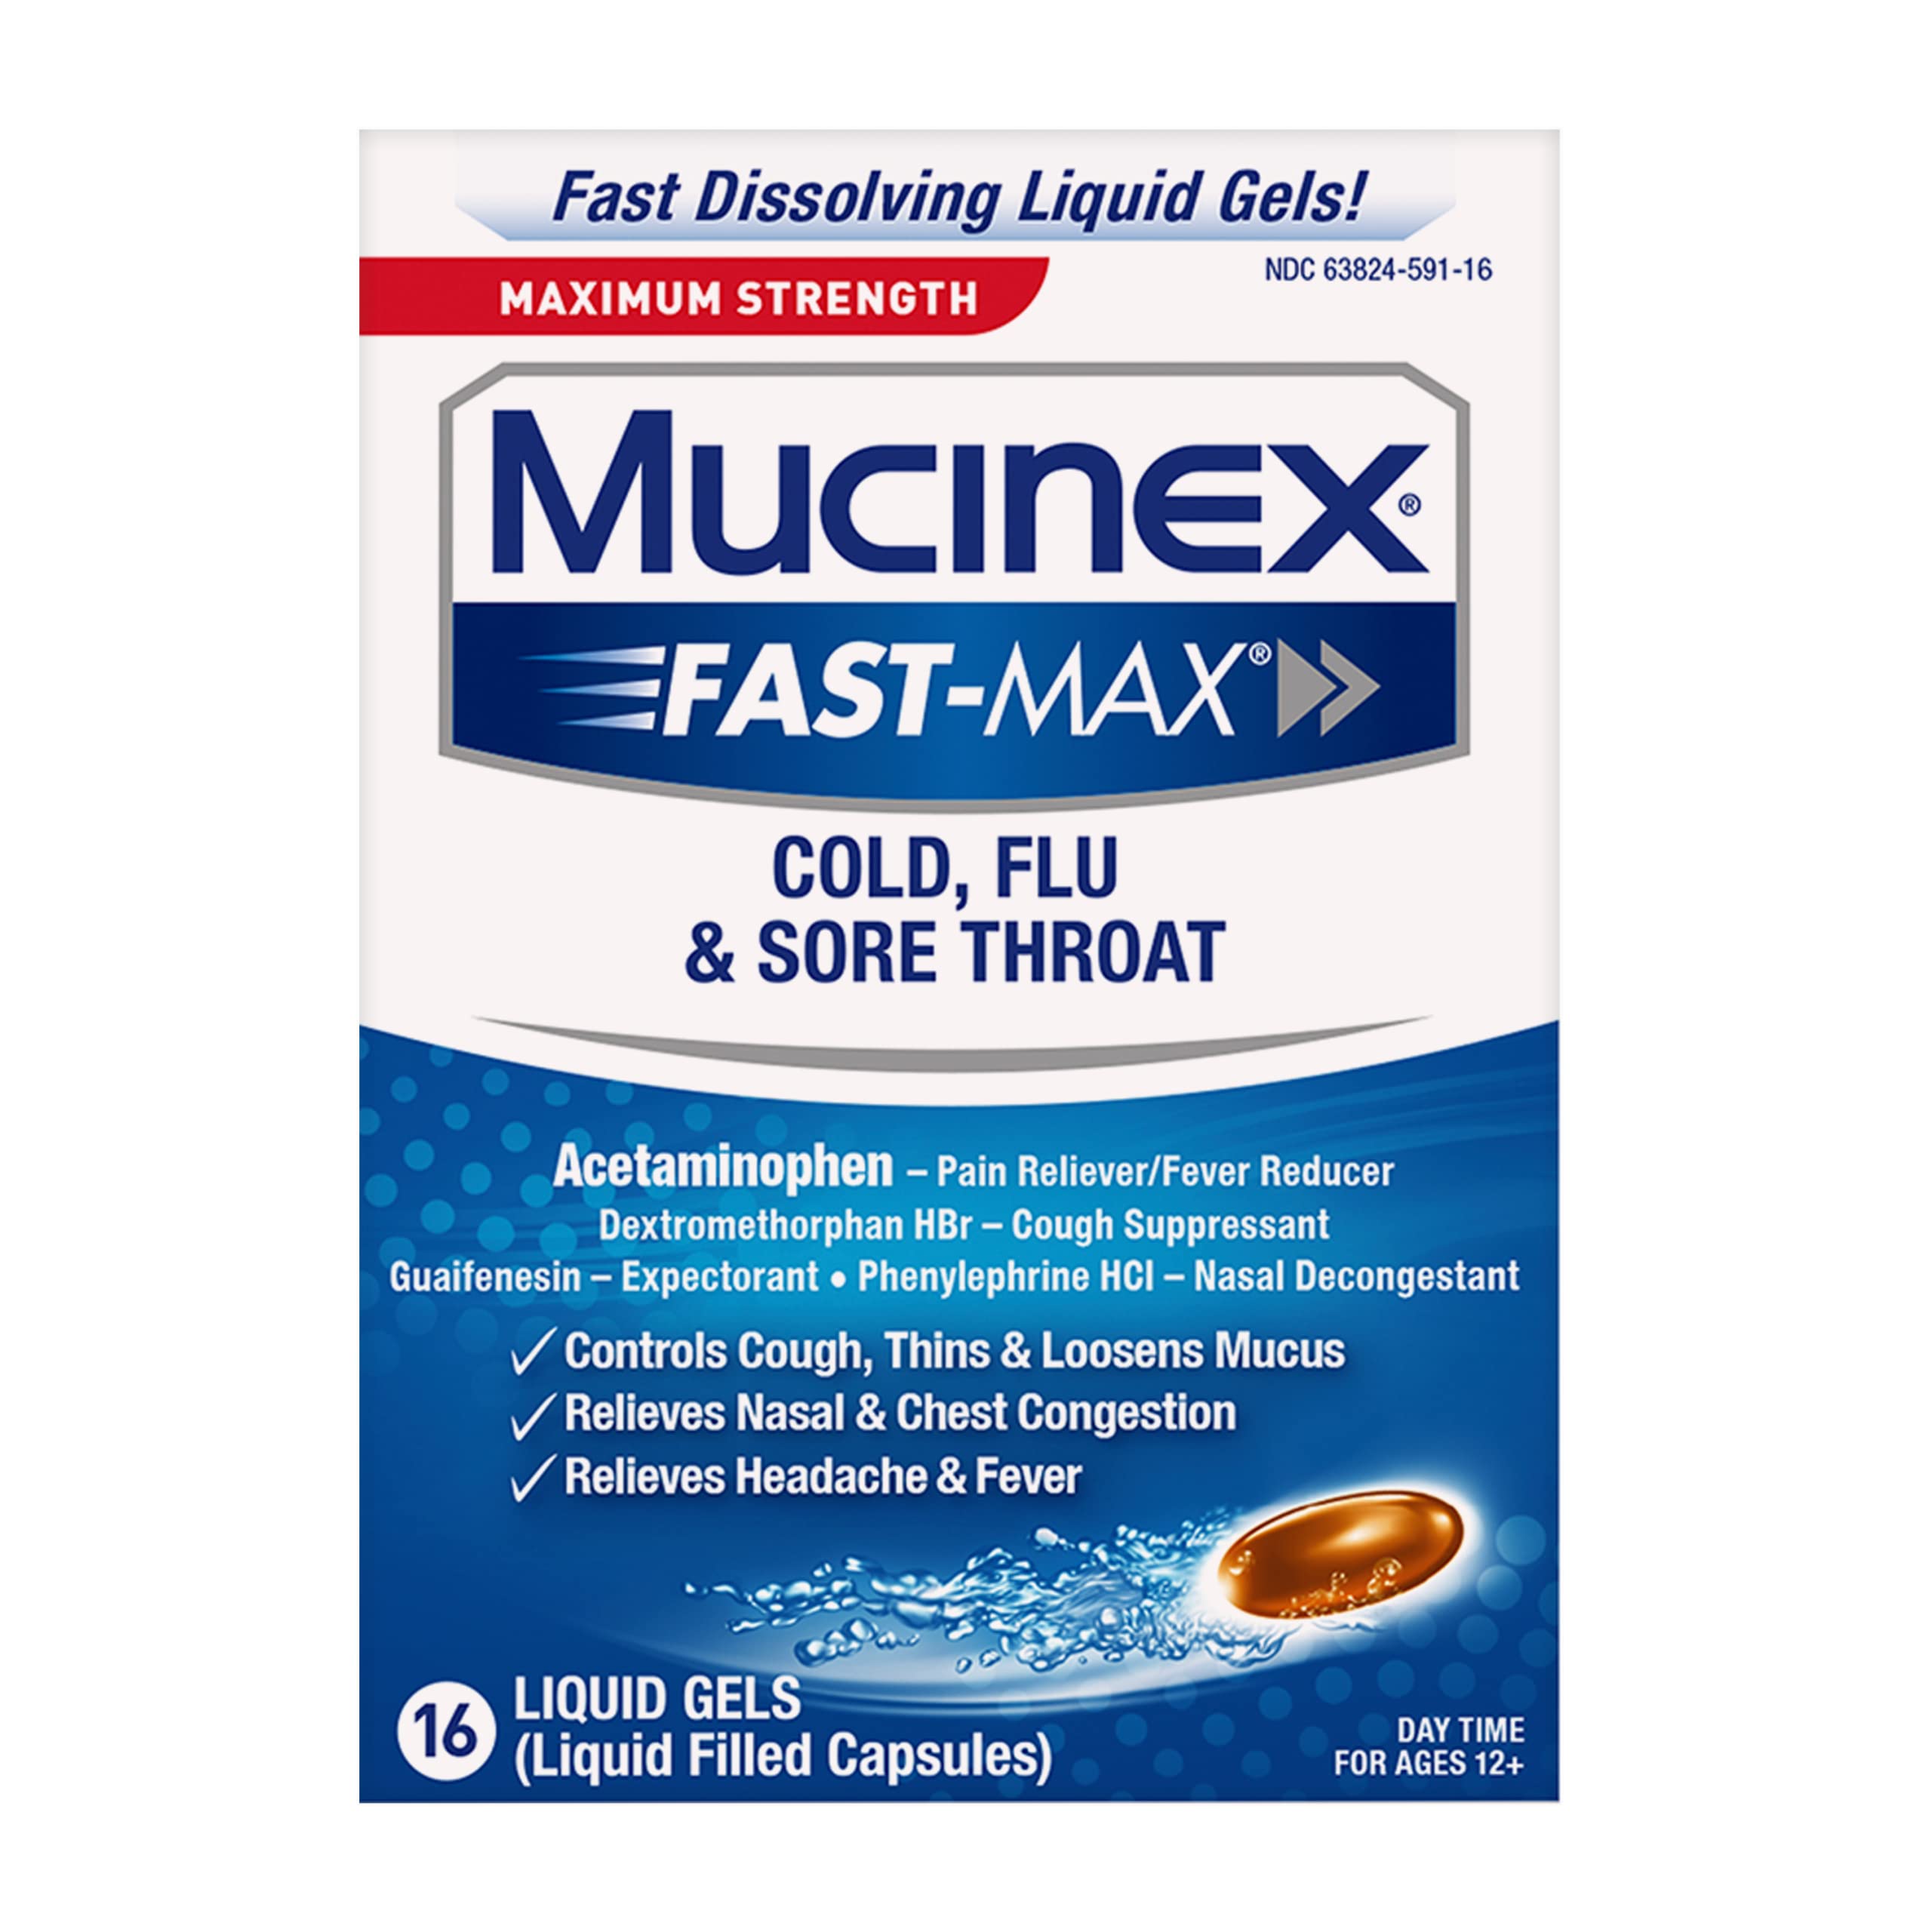 Maximum Strength Mucinex Fast-Max Cold, Flu, & Sore Throat Liquid Gels, 16ct, Controls Cough, Thins & Loosens Mucus, Relieves Nasal & Chest Congestion, Headache & Fever